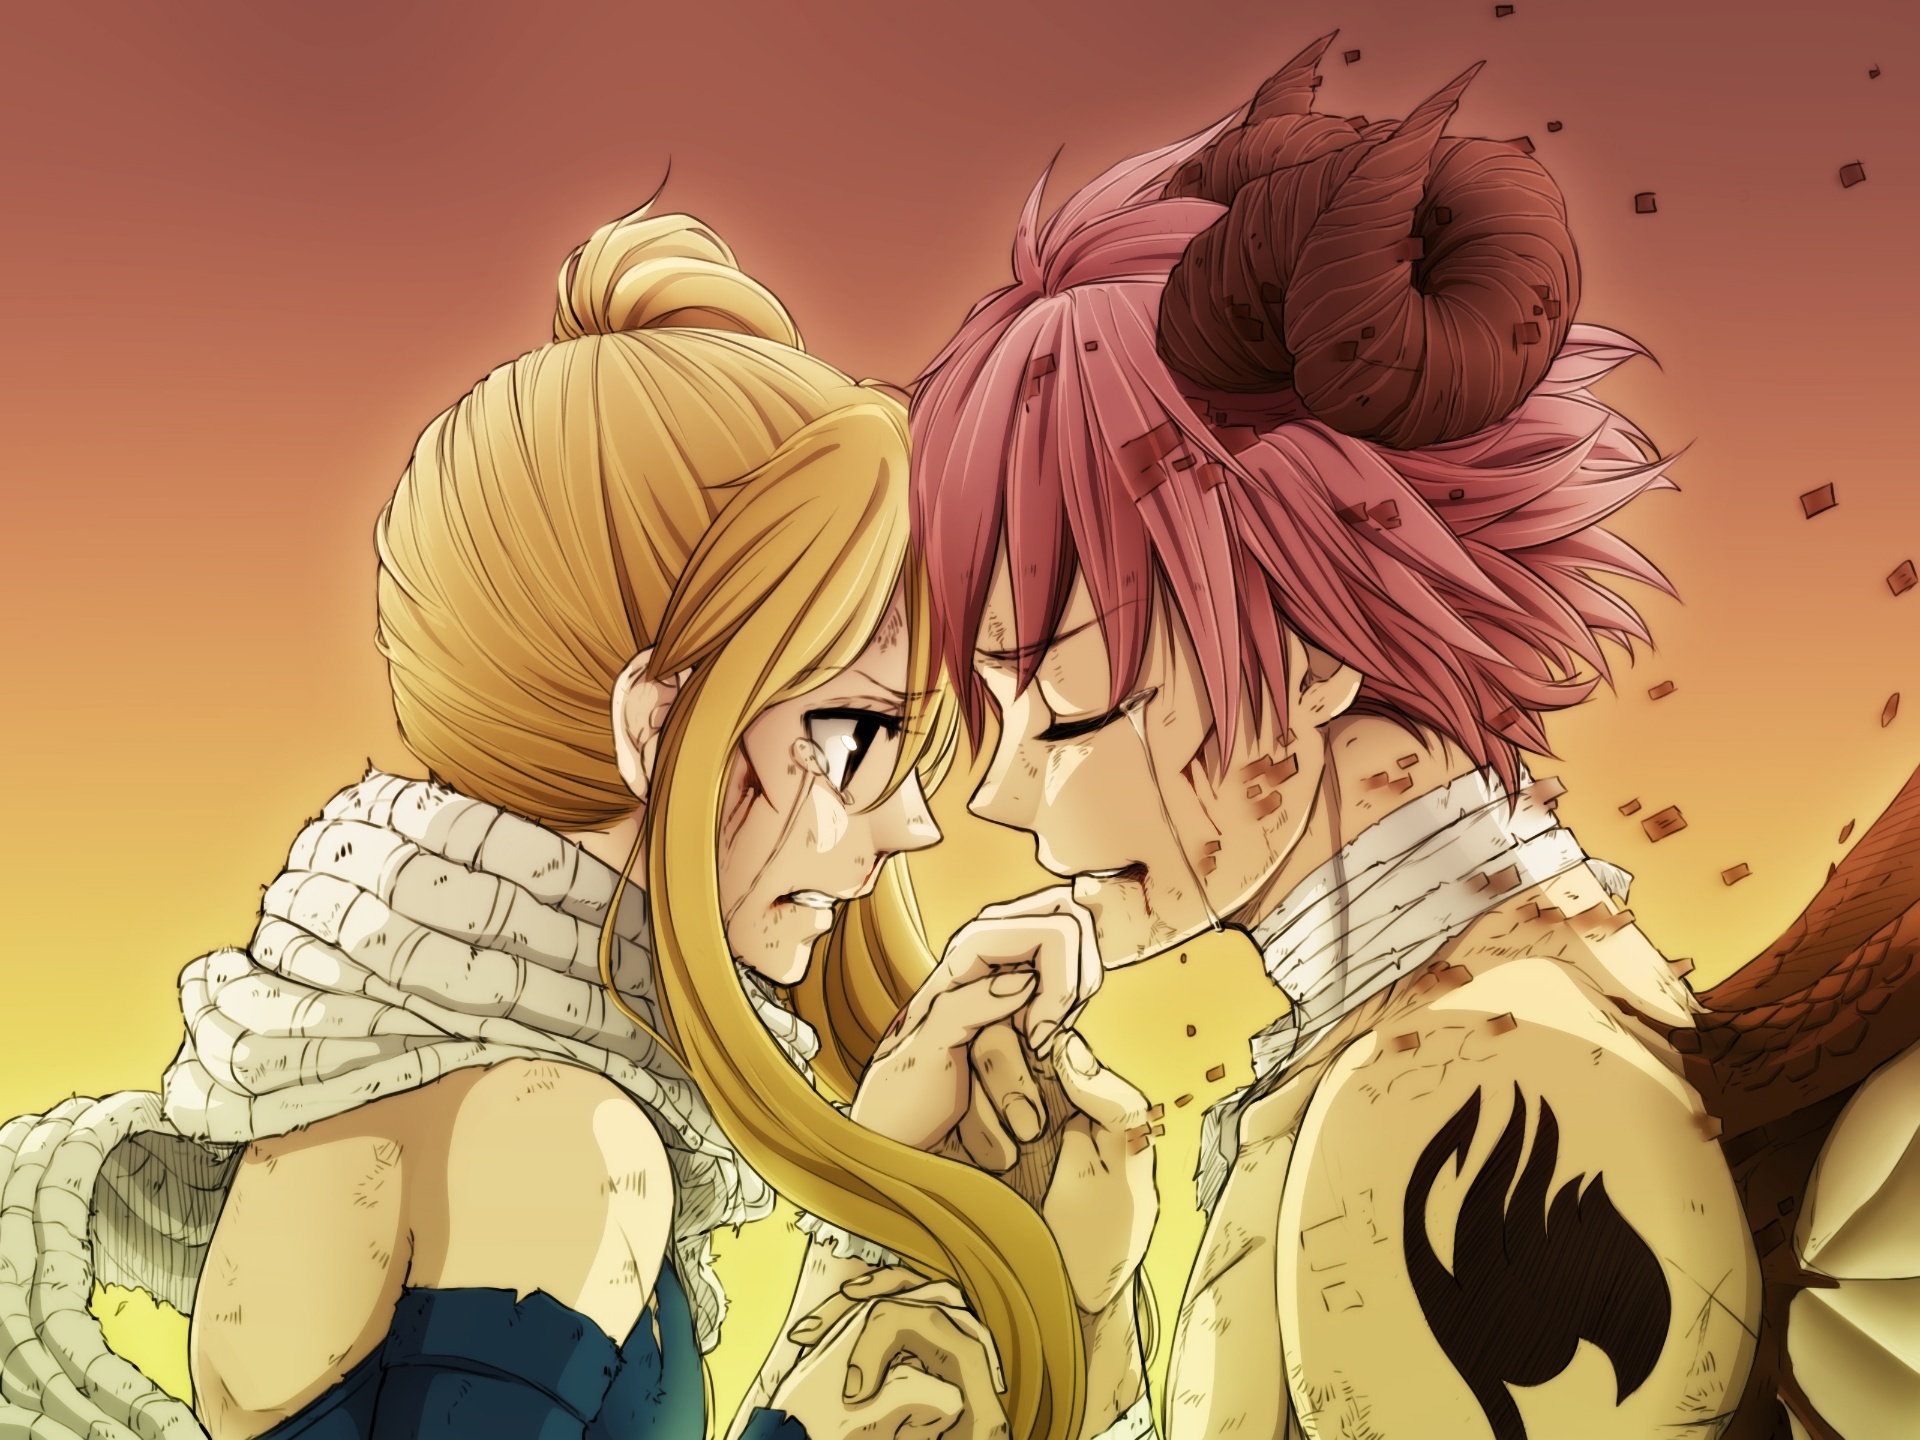 Natsu X Lucy, Tears, Scarf, After Fight, Fairy Tail.